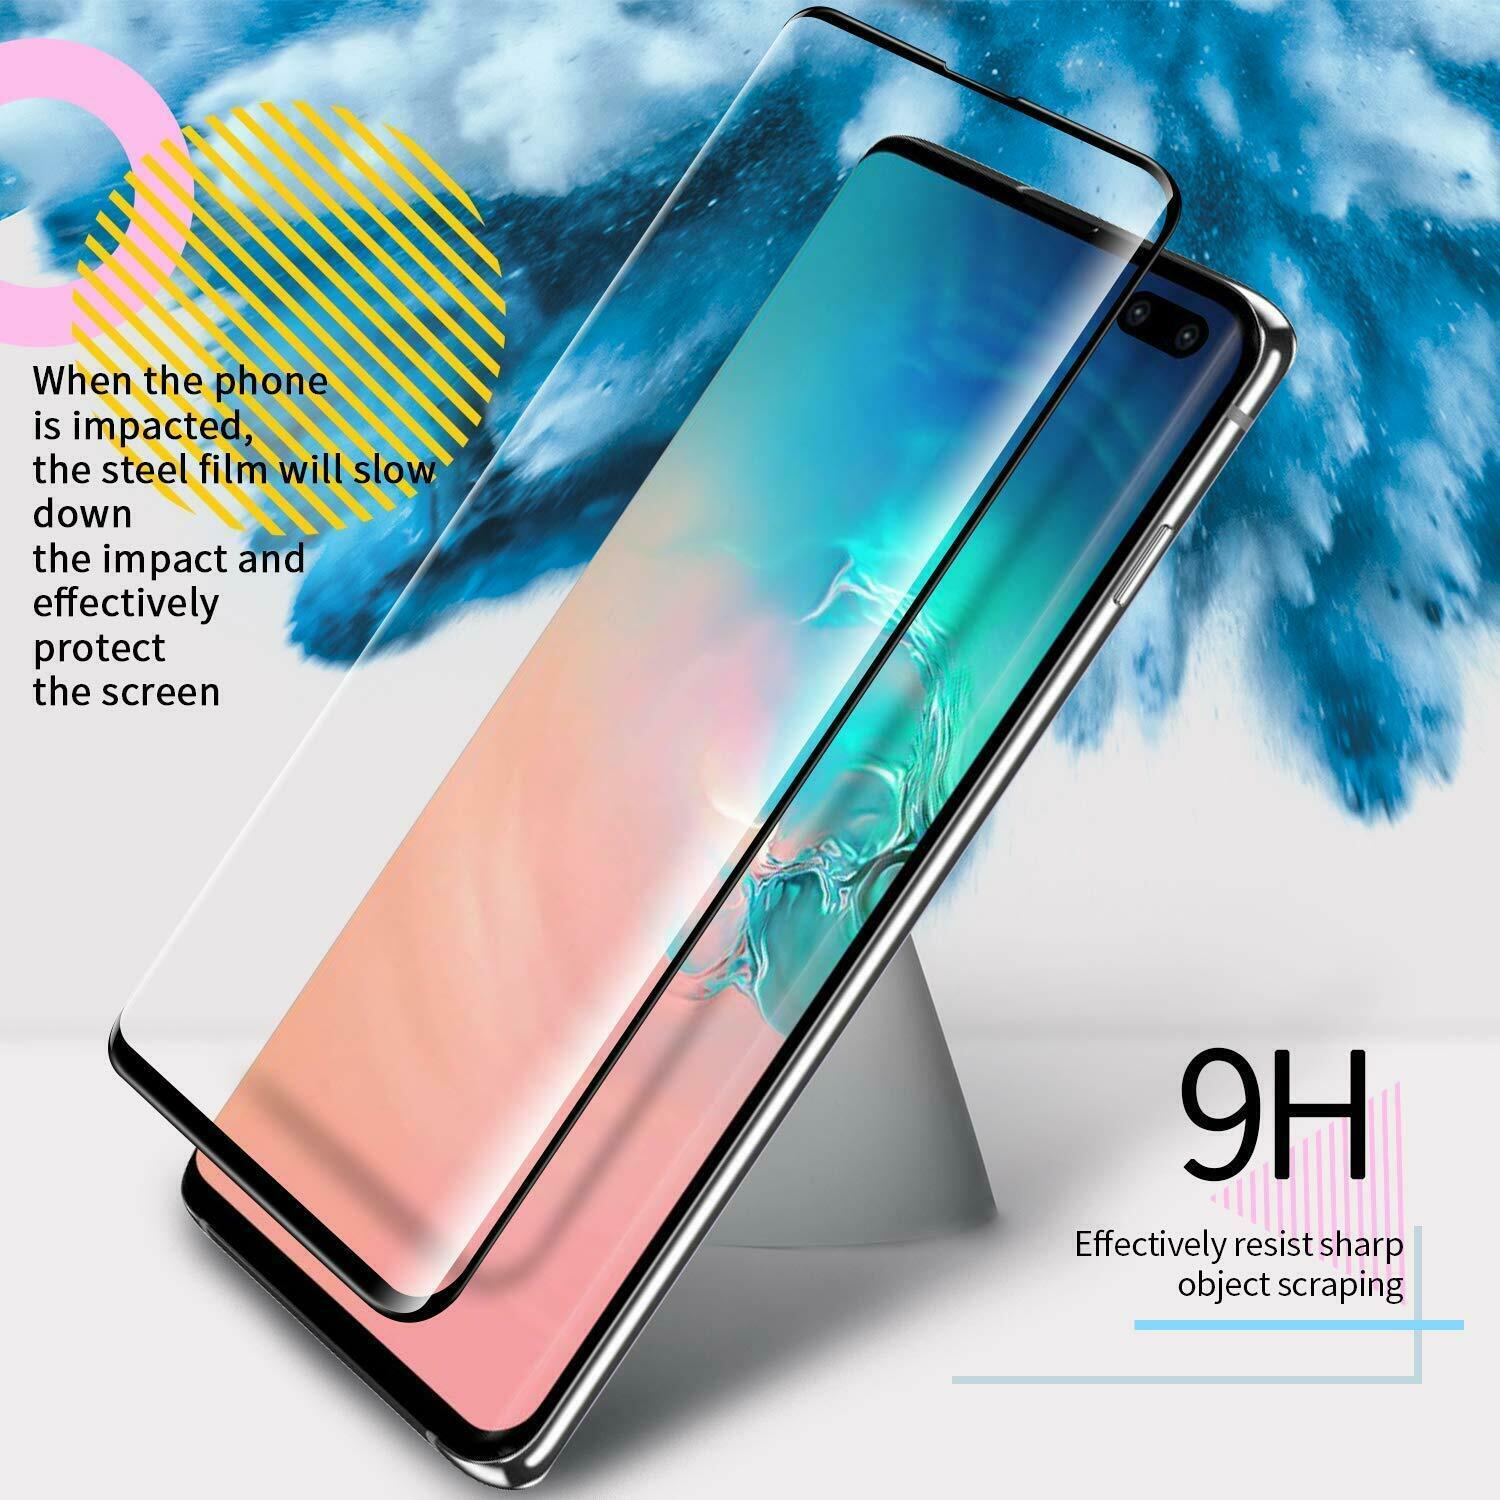 Samsung Premium 9H Curved Tempered Glass Screen Protector